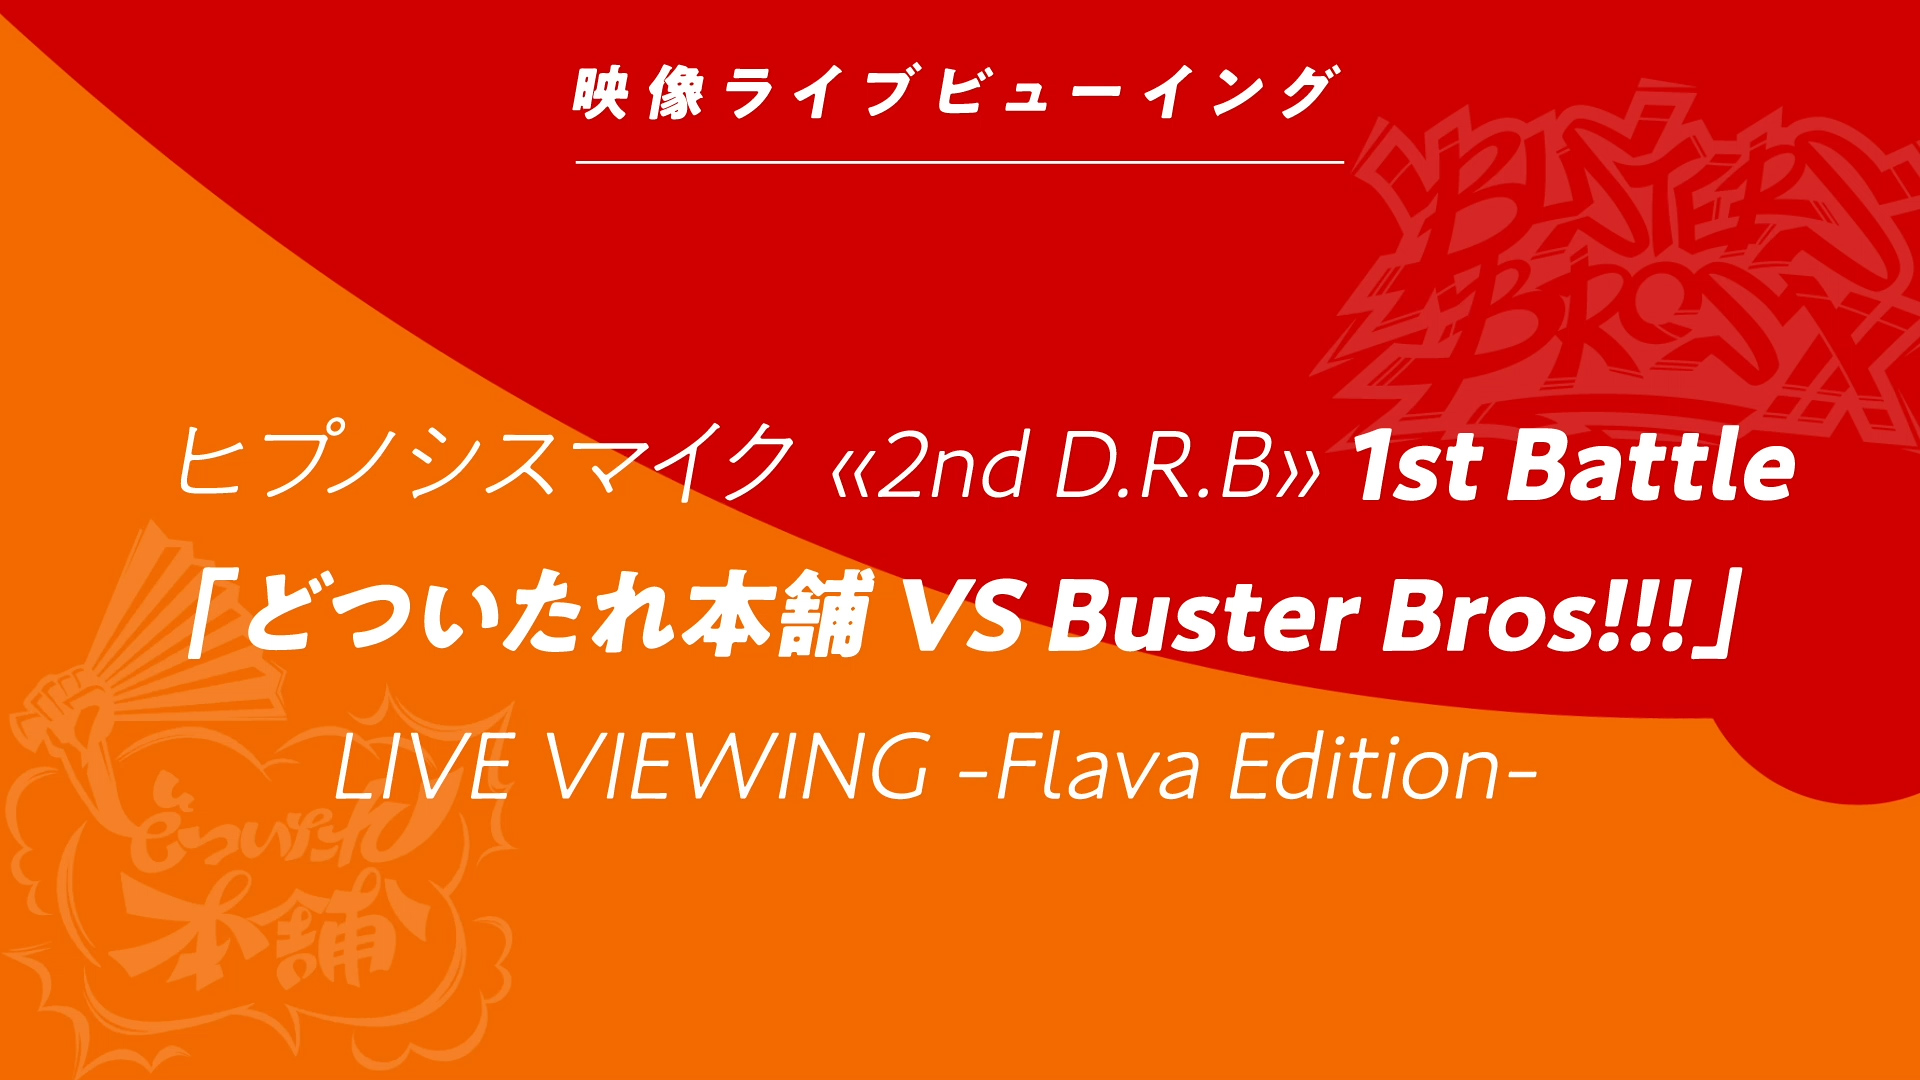 「Hypnosis Flava@Mixalive TOKYO」ヒプノシスマイク2nd D.R.B LIVE VIEWING -Flava Edition-1st Battle